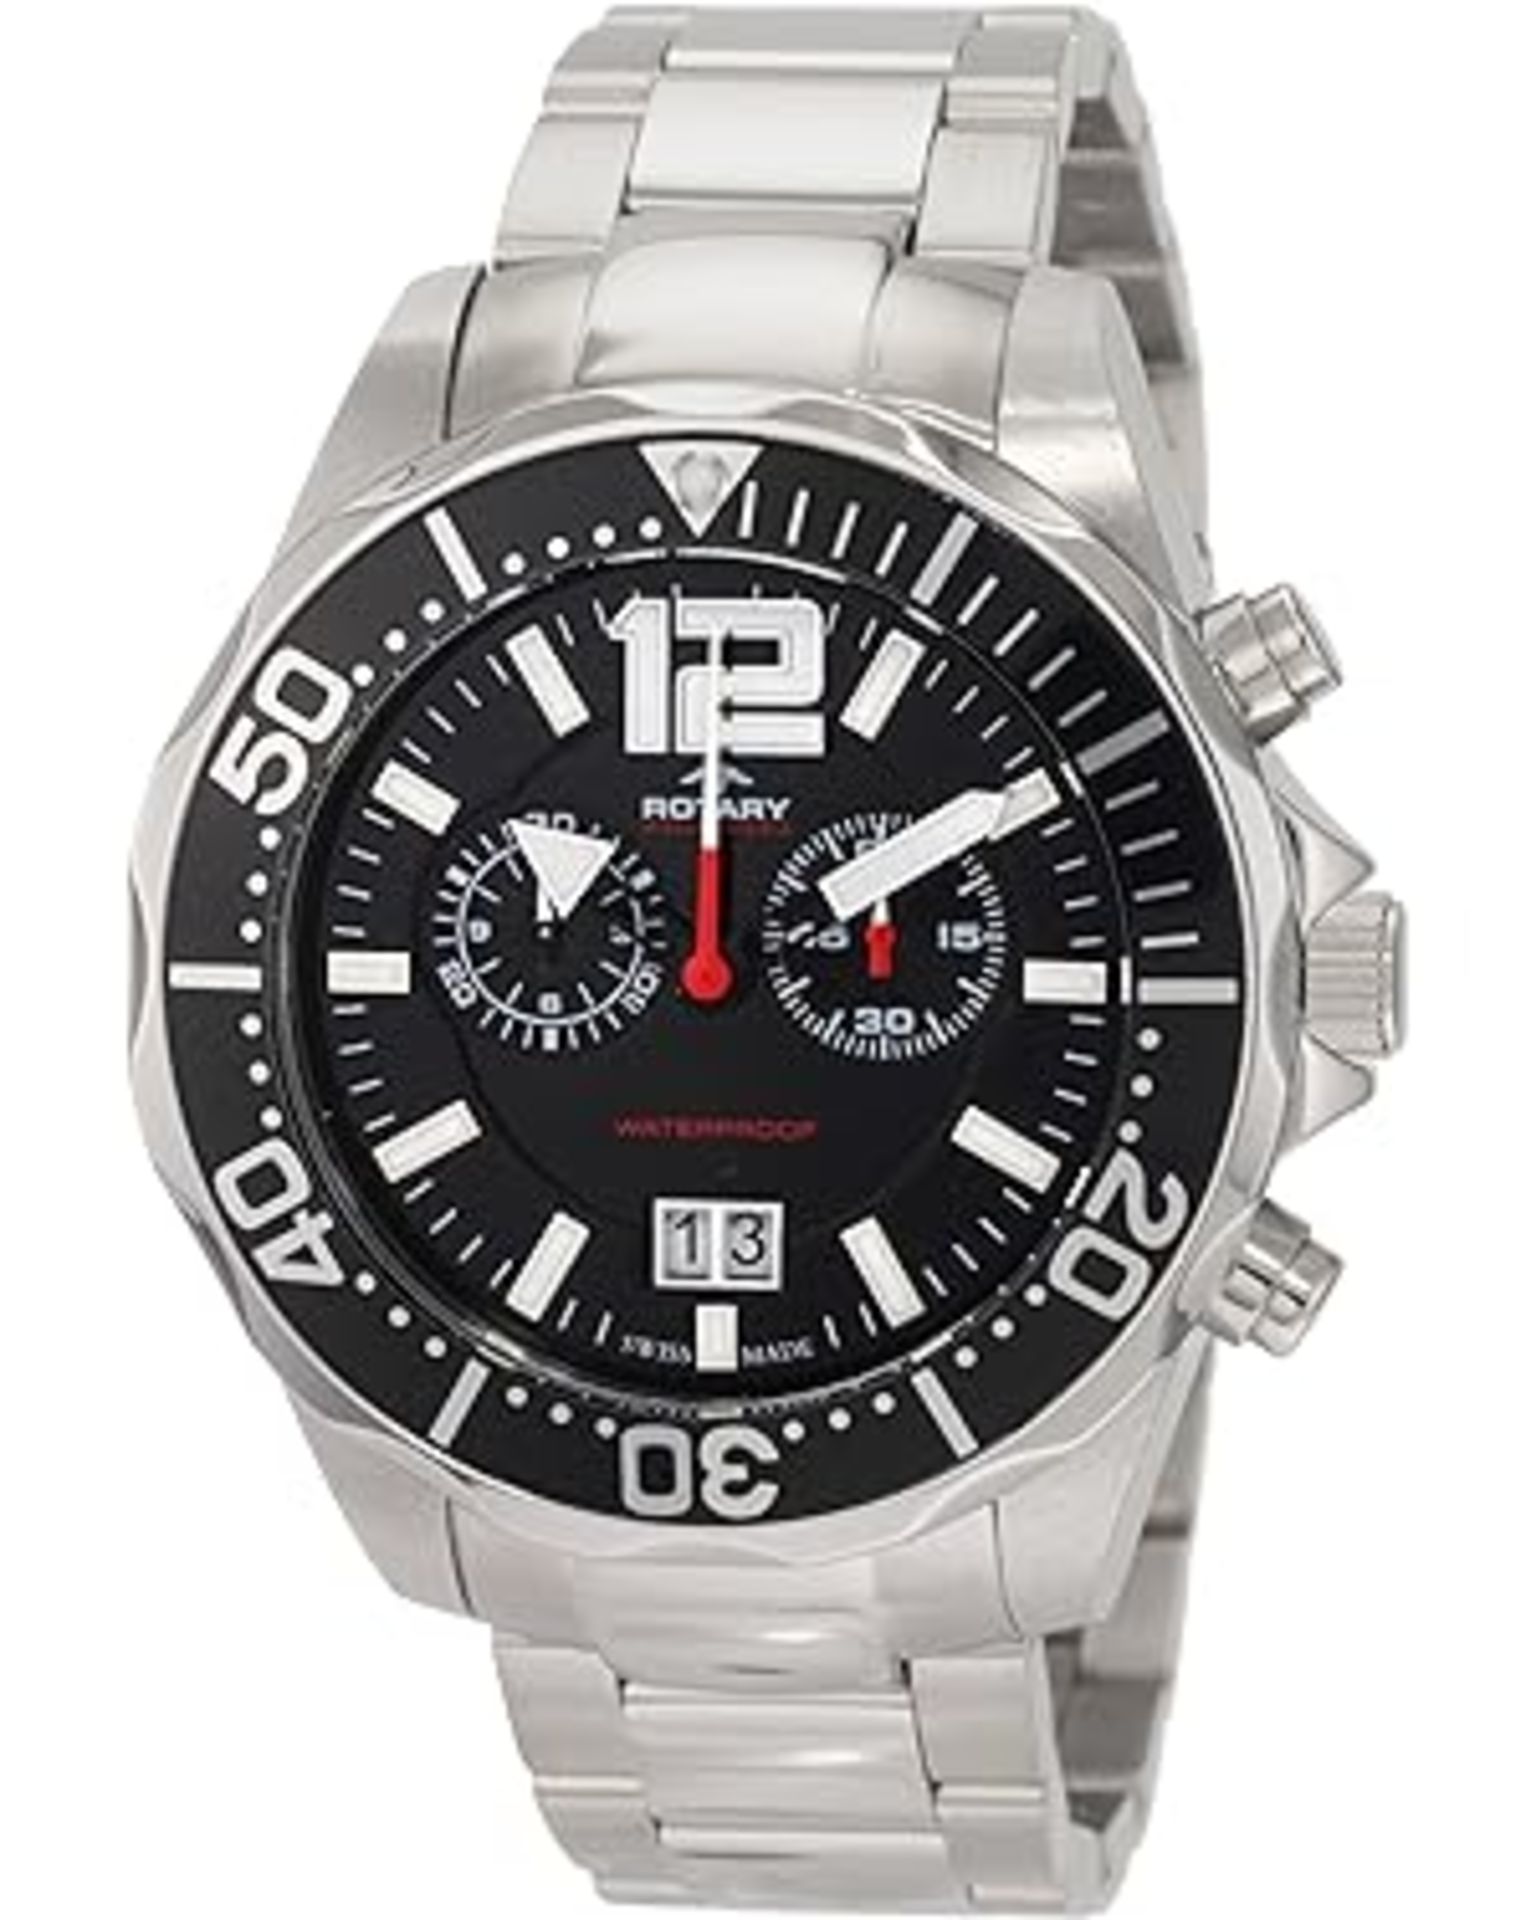 Swiss Made Rotary Men's Quartz Watch with Black Dial Chronograph Display and Silver Stainless